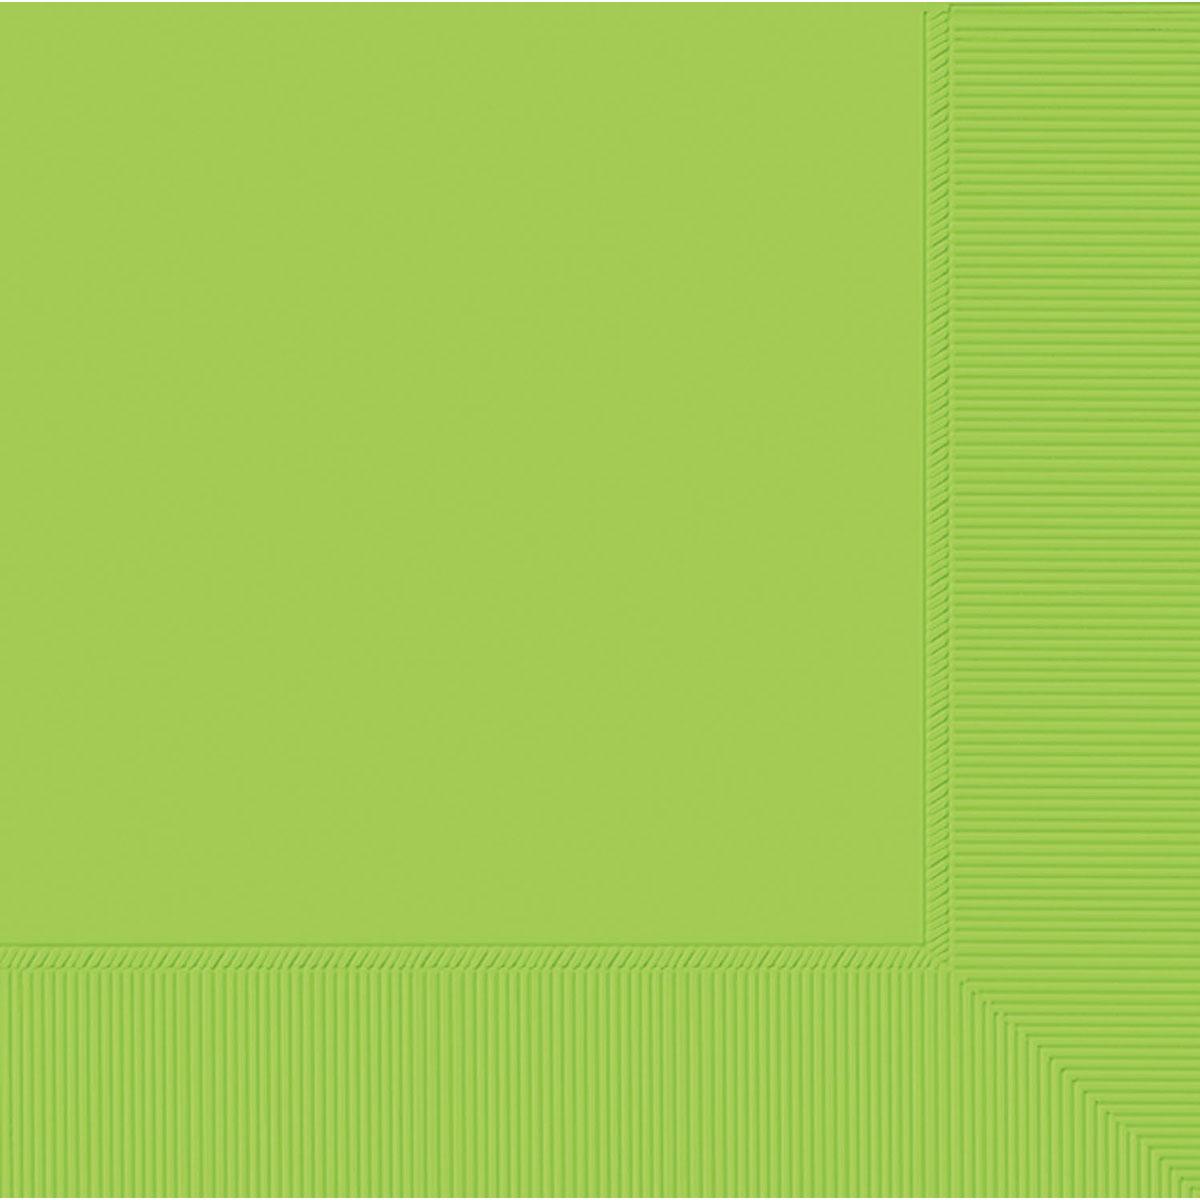 Pack of 20 Kiwi Green Beverage Napkins 2ply 23cm by Amscan 50220-53 available here at Karnival Costumes online party shop